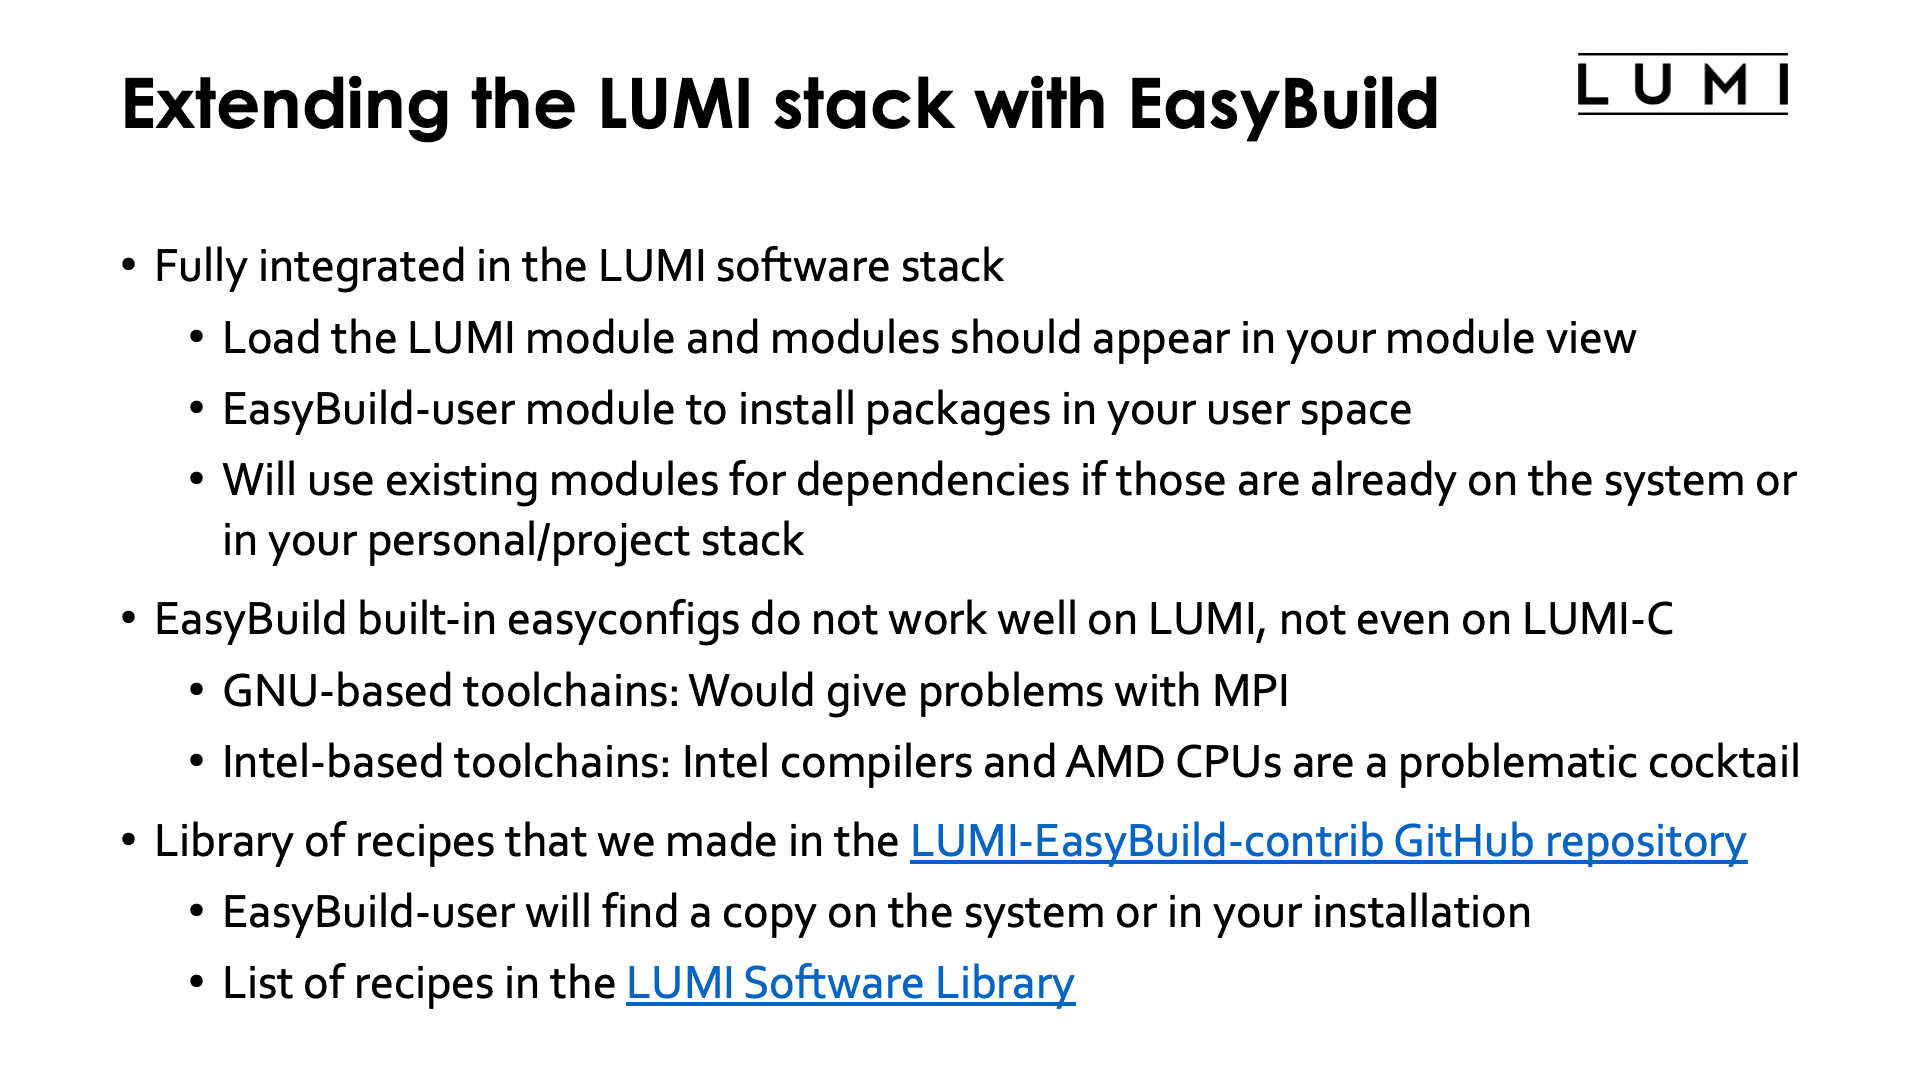 Extending the LUMI stack with EasyBuild